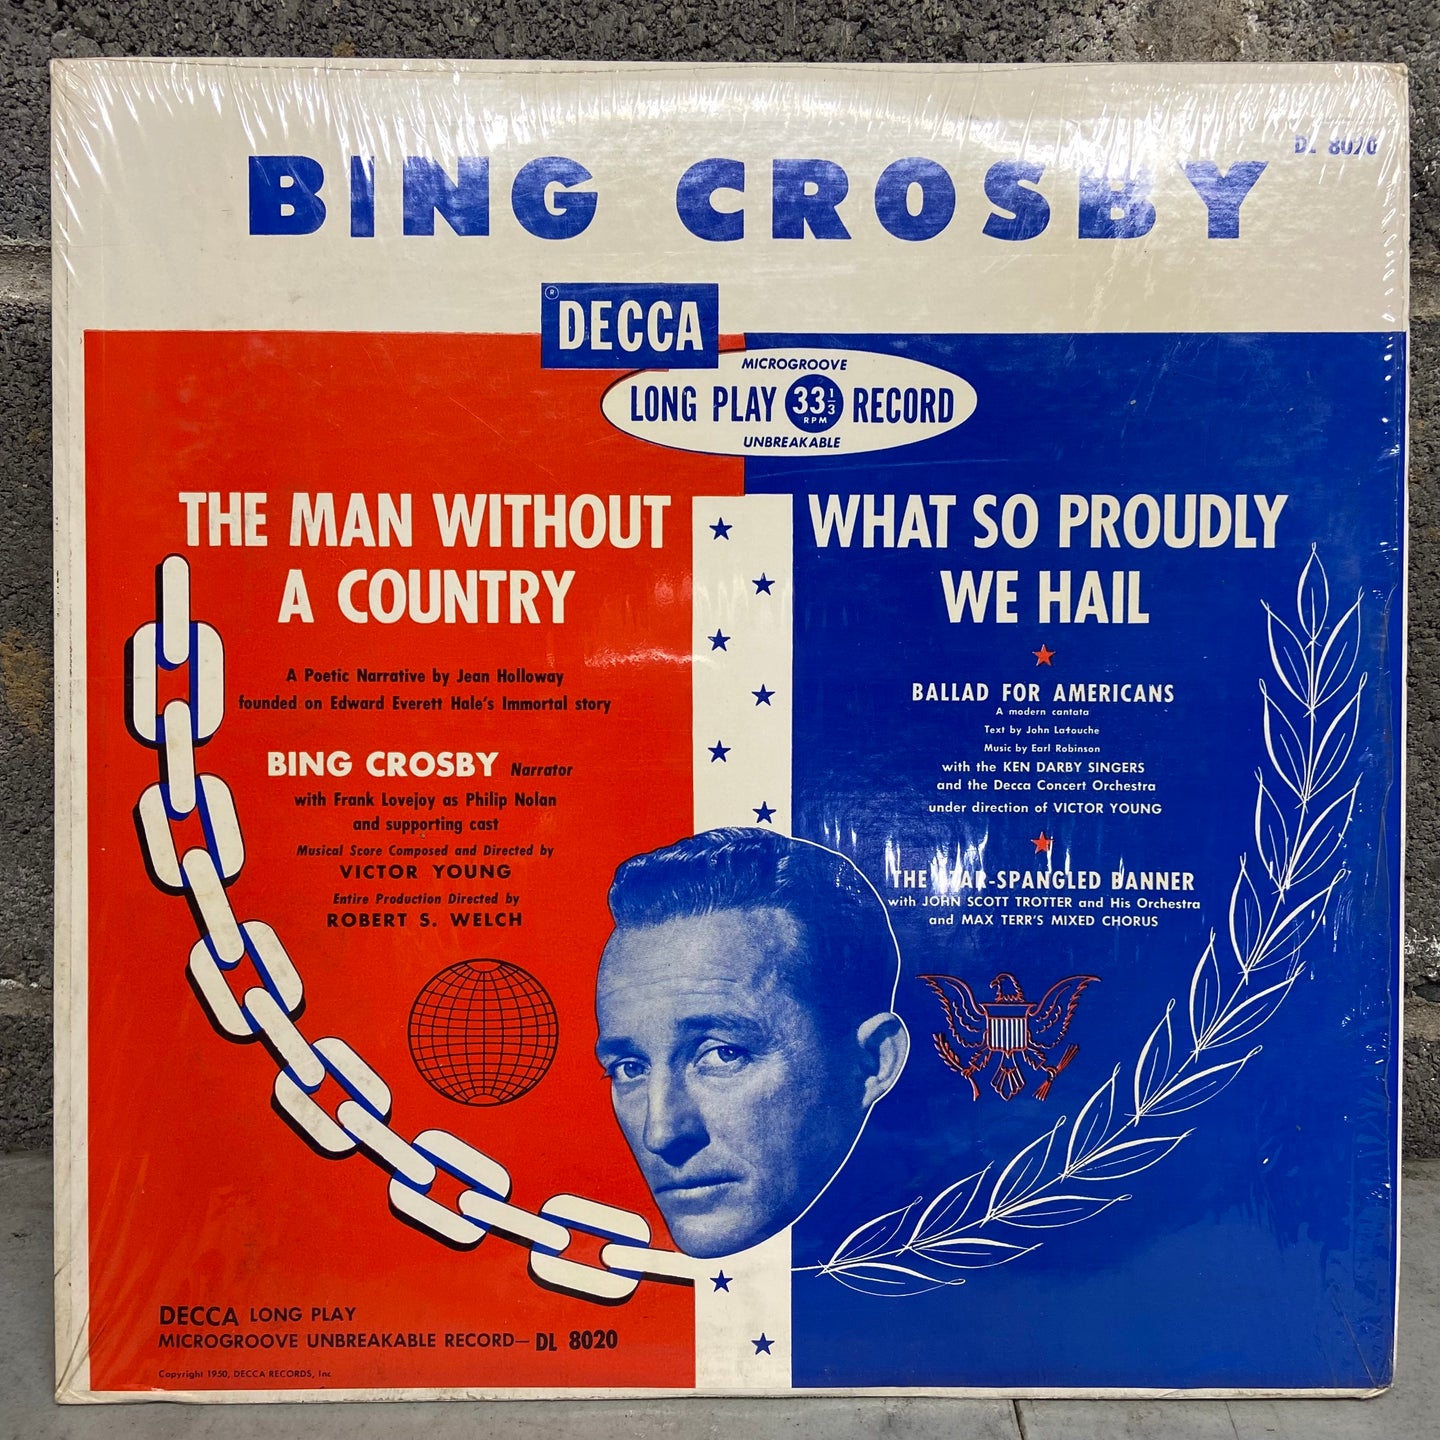 Bing Crosby – The Man Without A Country and What So Proudly We Hail